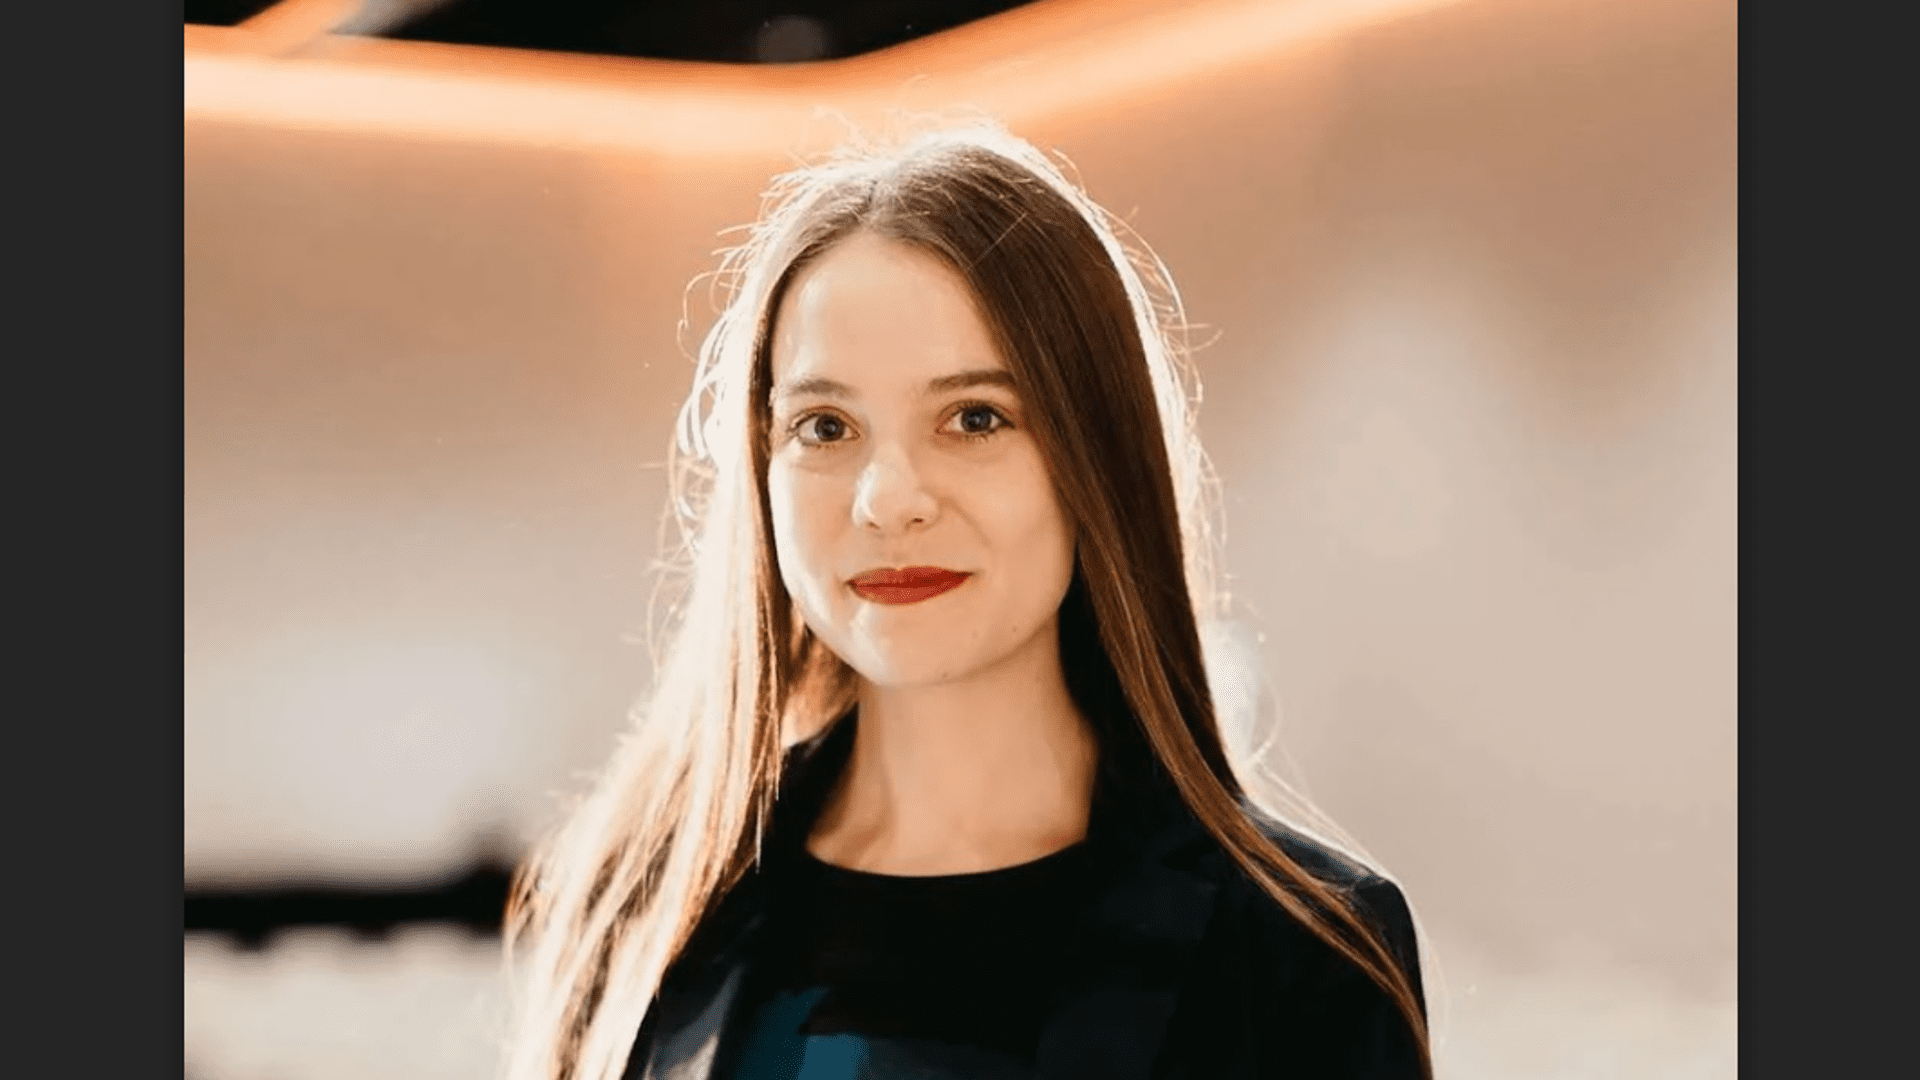 Dr. Vera Kichanova, an alumna of Students For Liberty from Russia, has joined the Free Cities Foundation as a Senior Economist